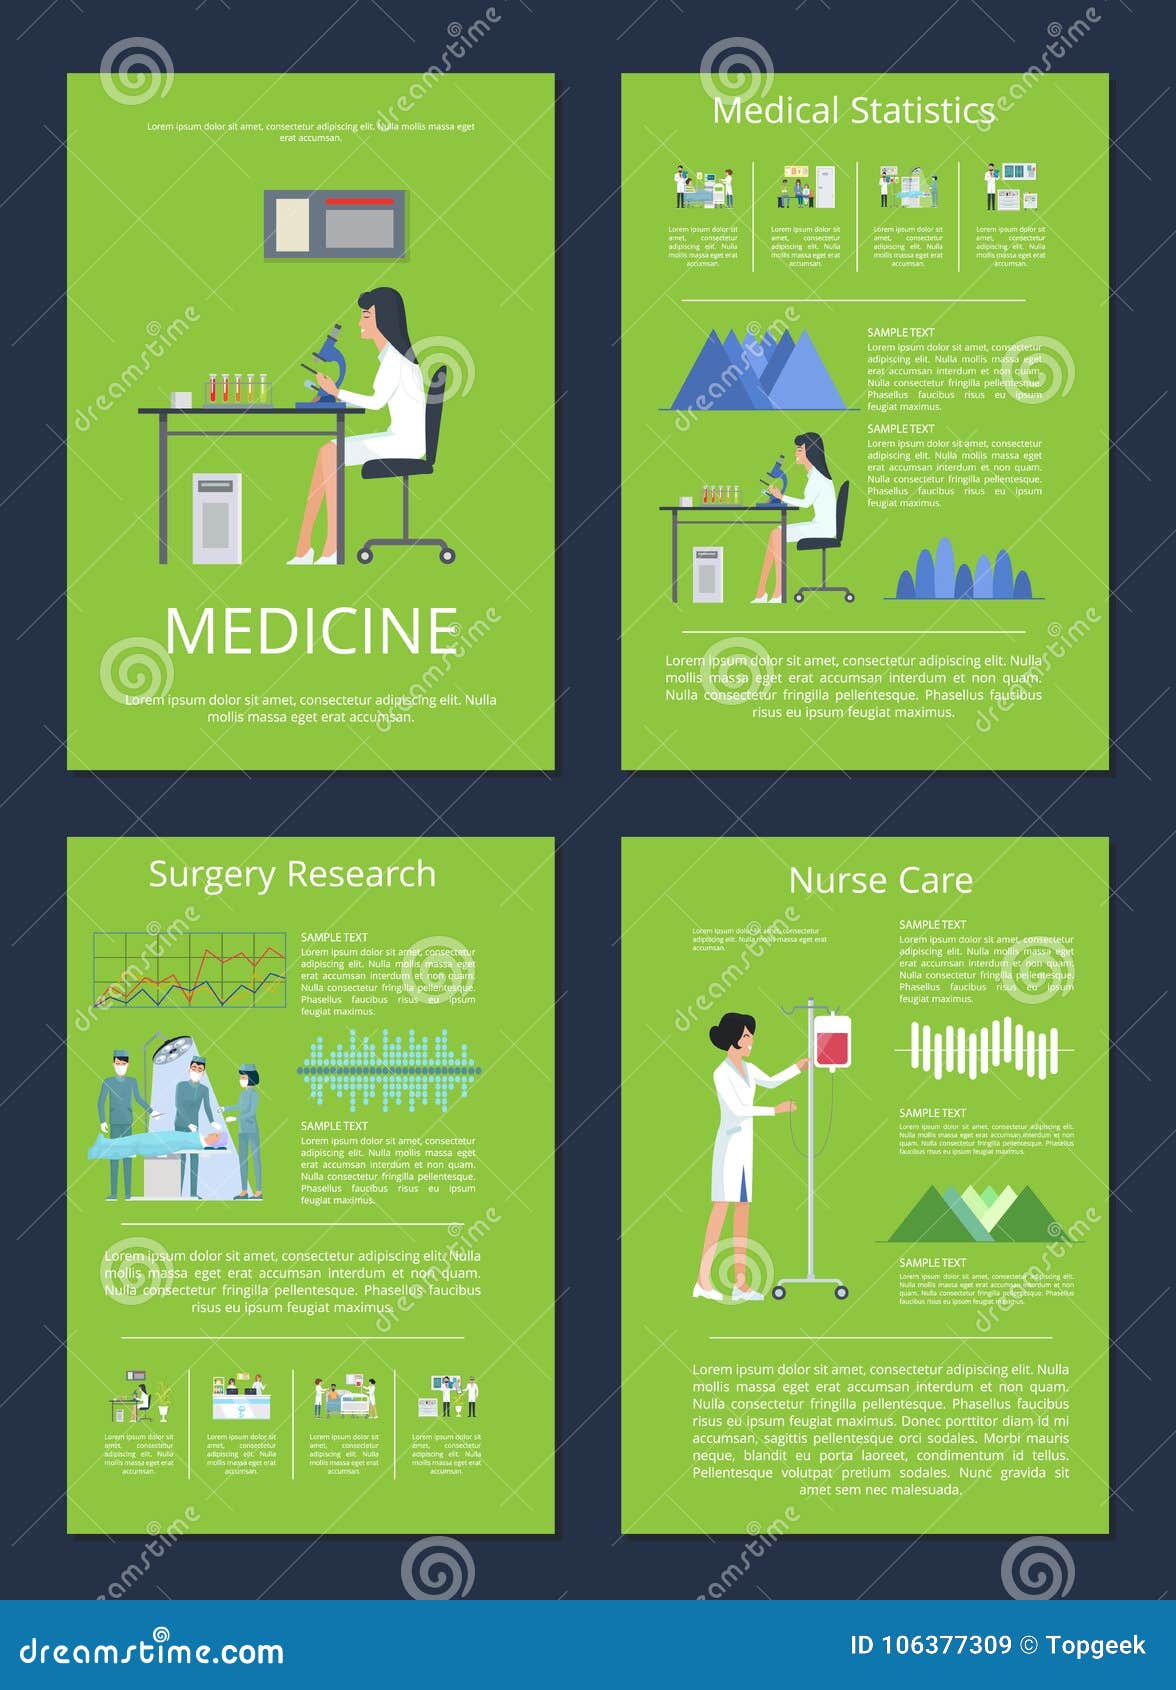 statistics for healthcare research